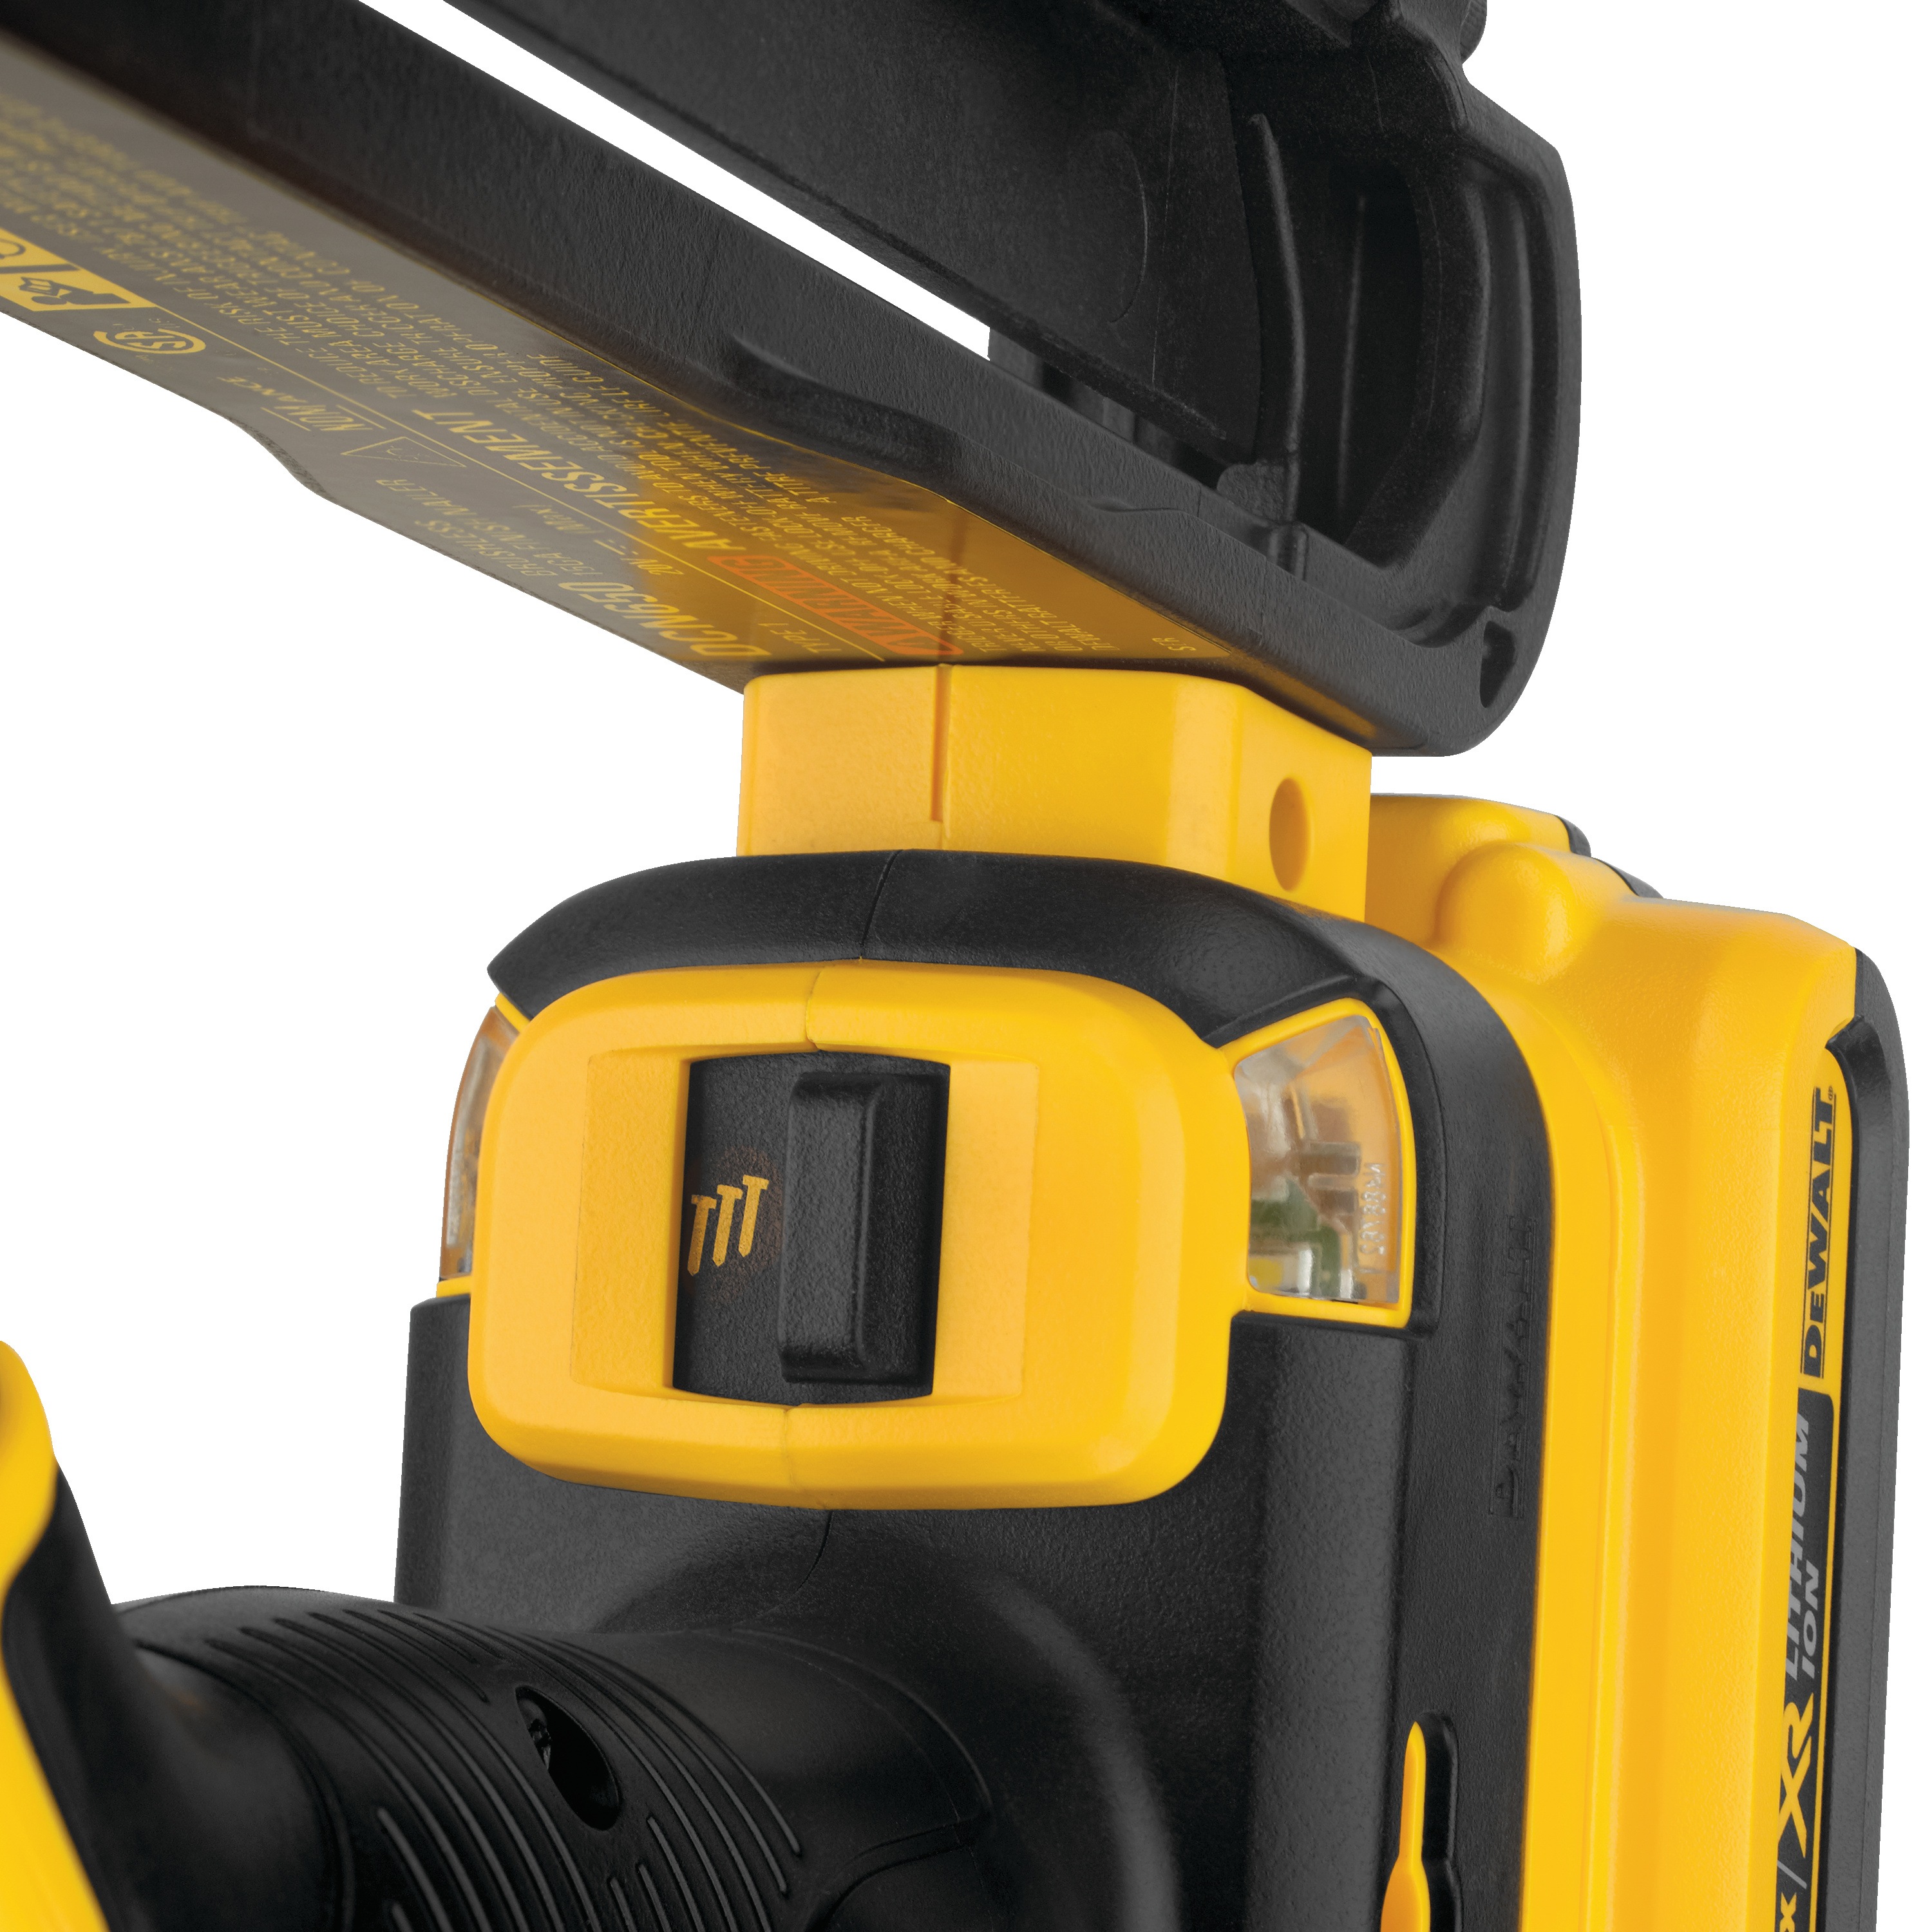 Close up on features of  XR Cordless 15 Gauge Angled Finish Nailer